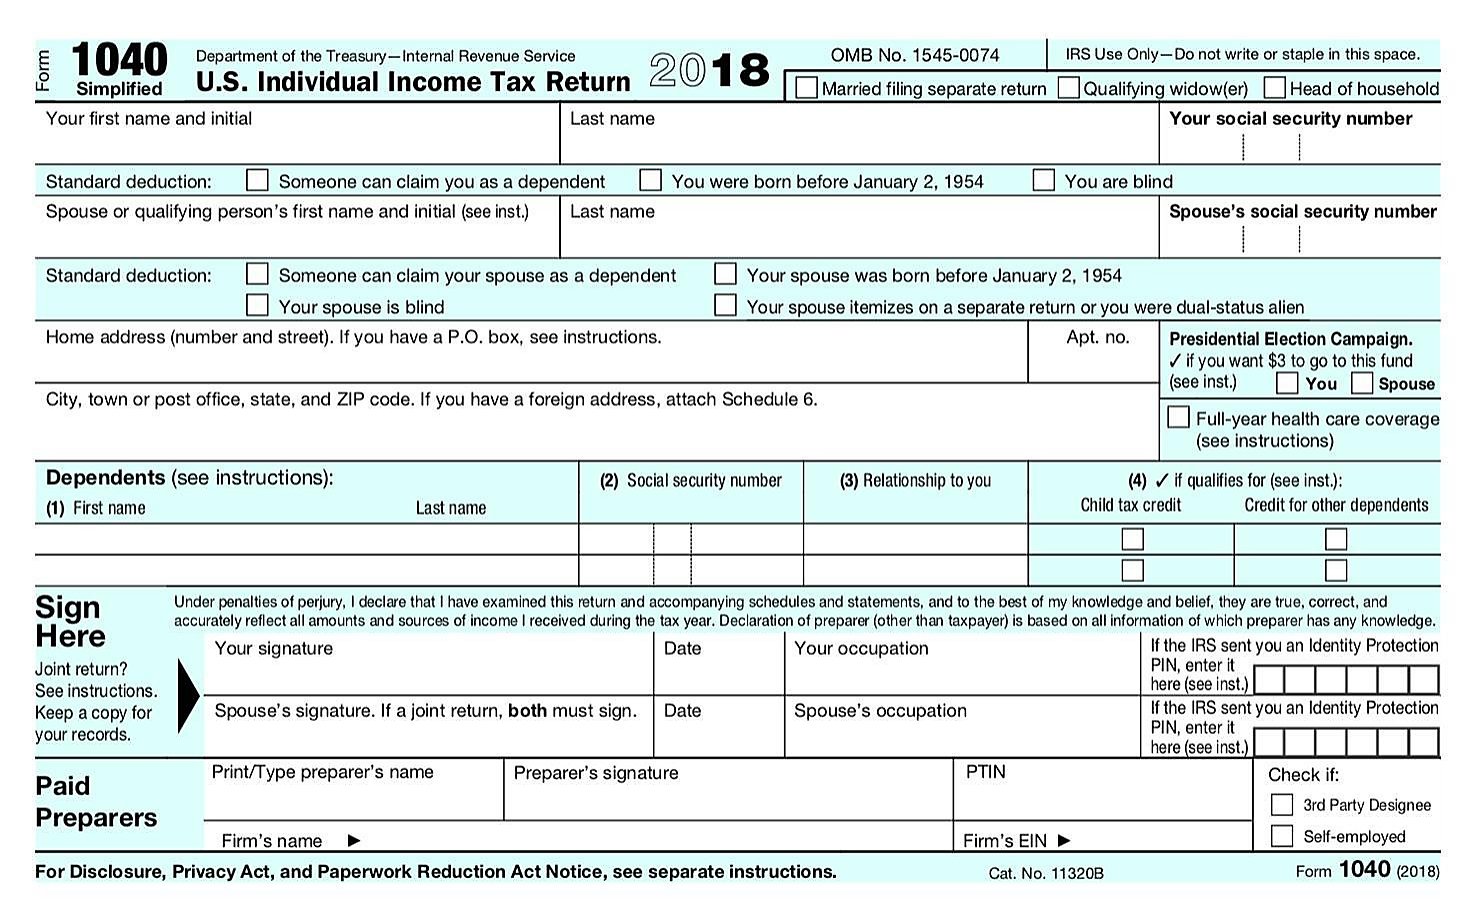 tax form images